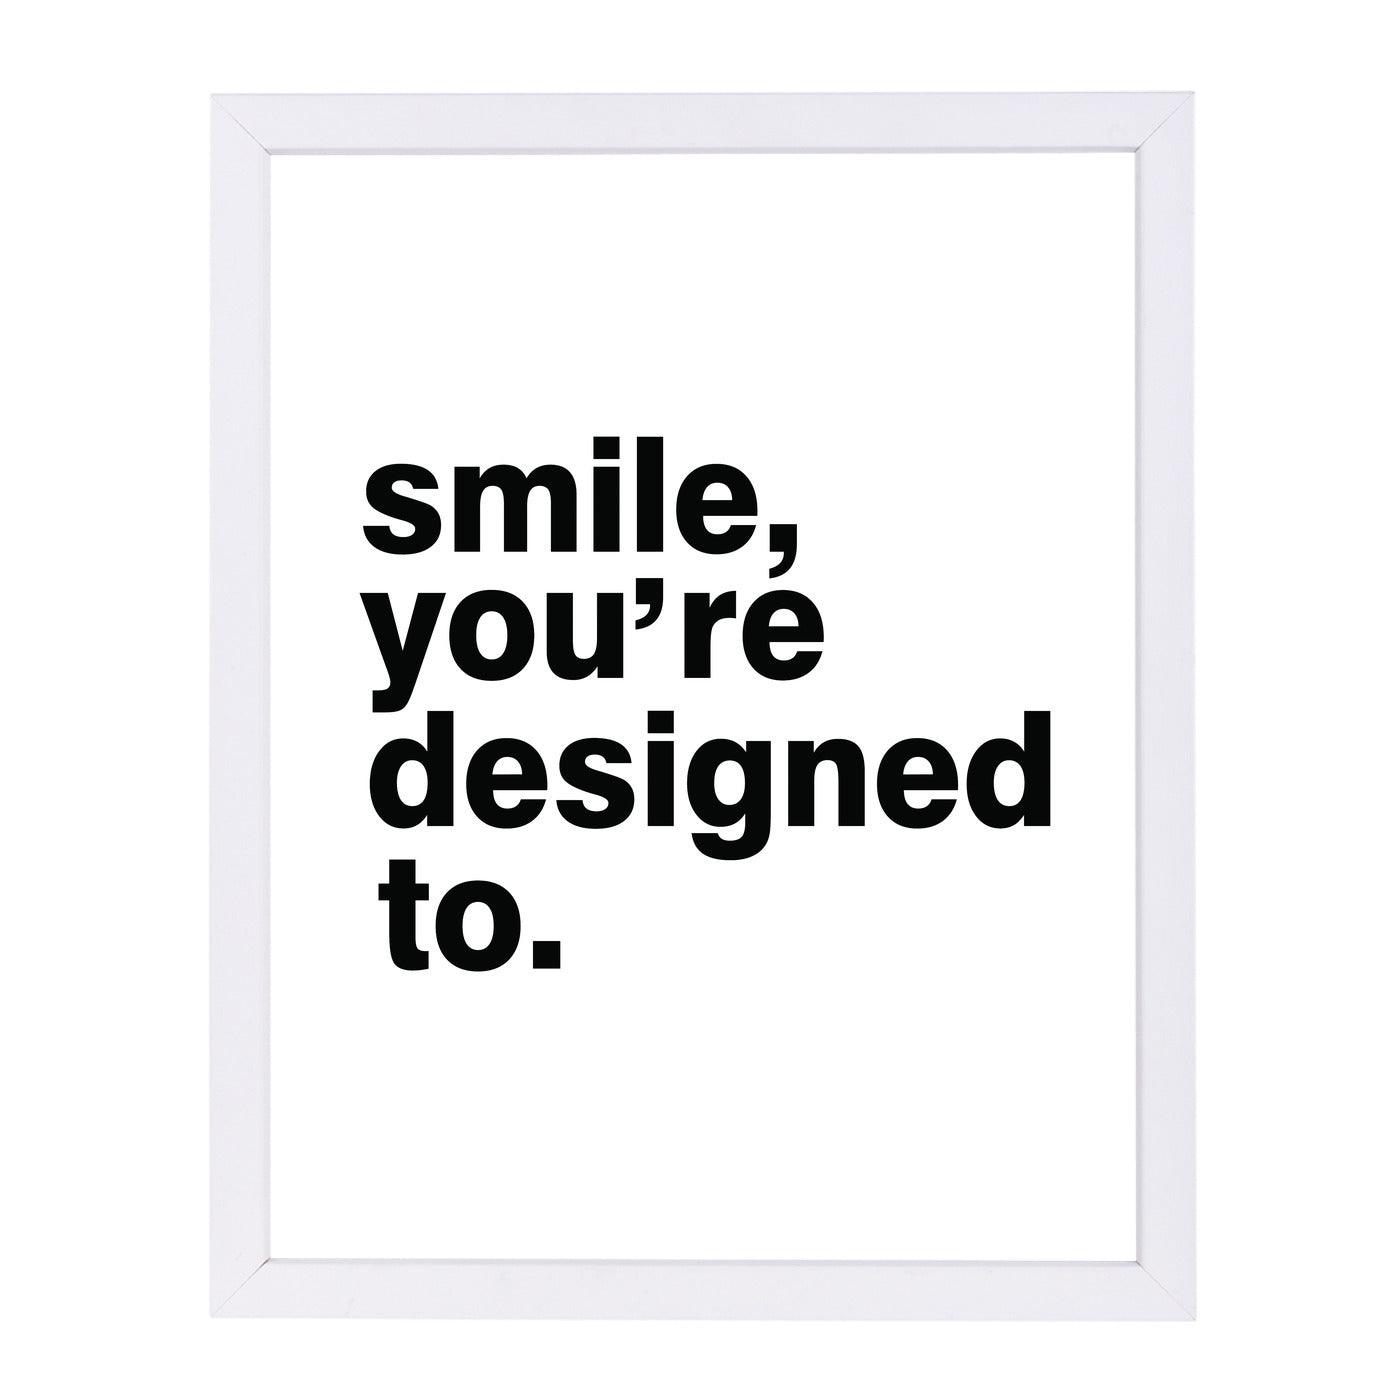 Smile, You're Designed To by Pop Monica Framed Print - Americanflat